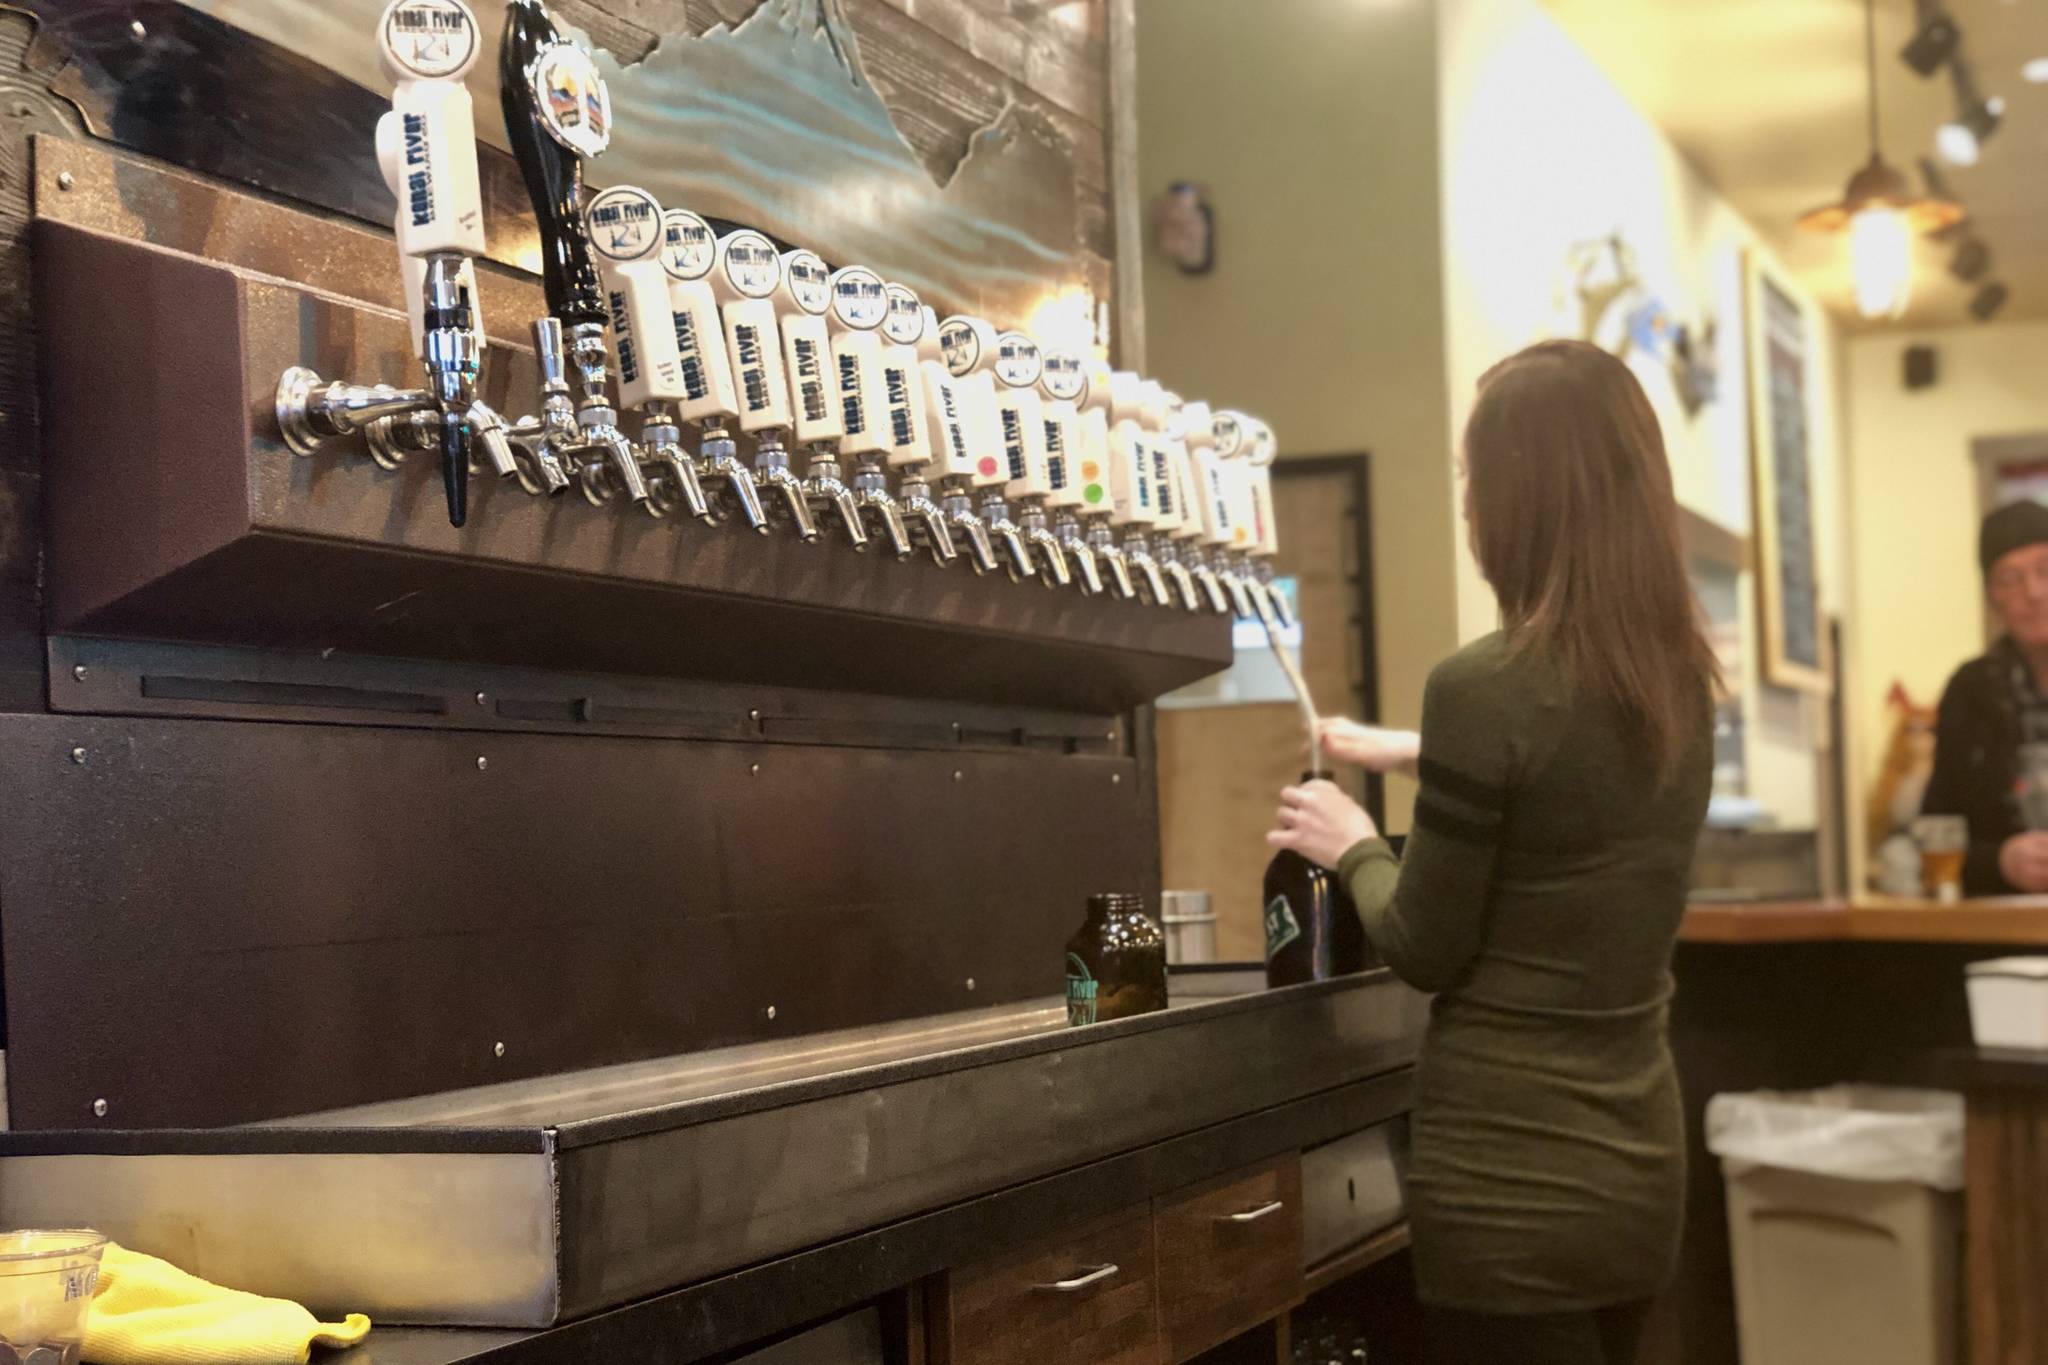 A bartender pours a beer at Kenai River Brewing Company on Saturday in Soldotna. Kenai River is serving a chocolate pumpkin porter beer as part of their seasonal offerings, (Photo by Victoria Petersen/Peninsula Clarion)